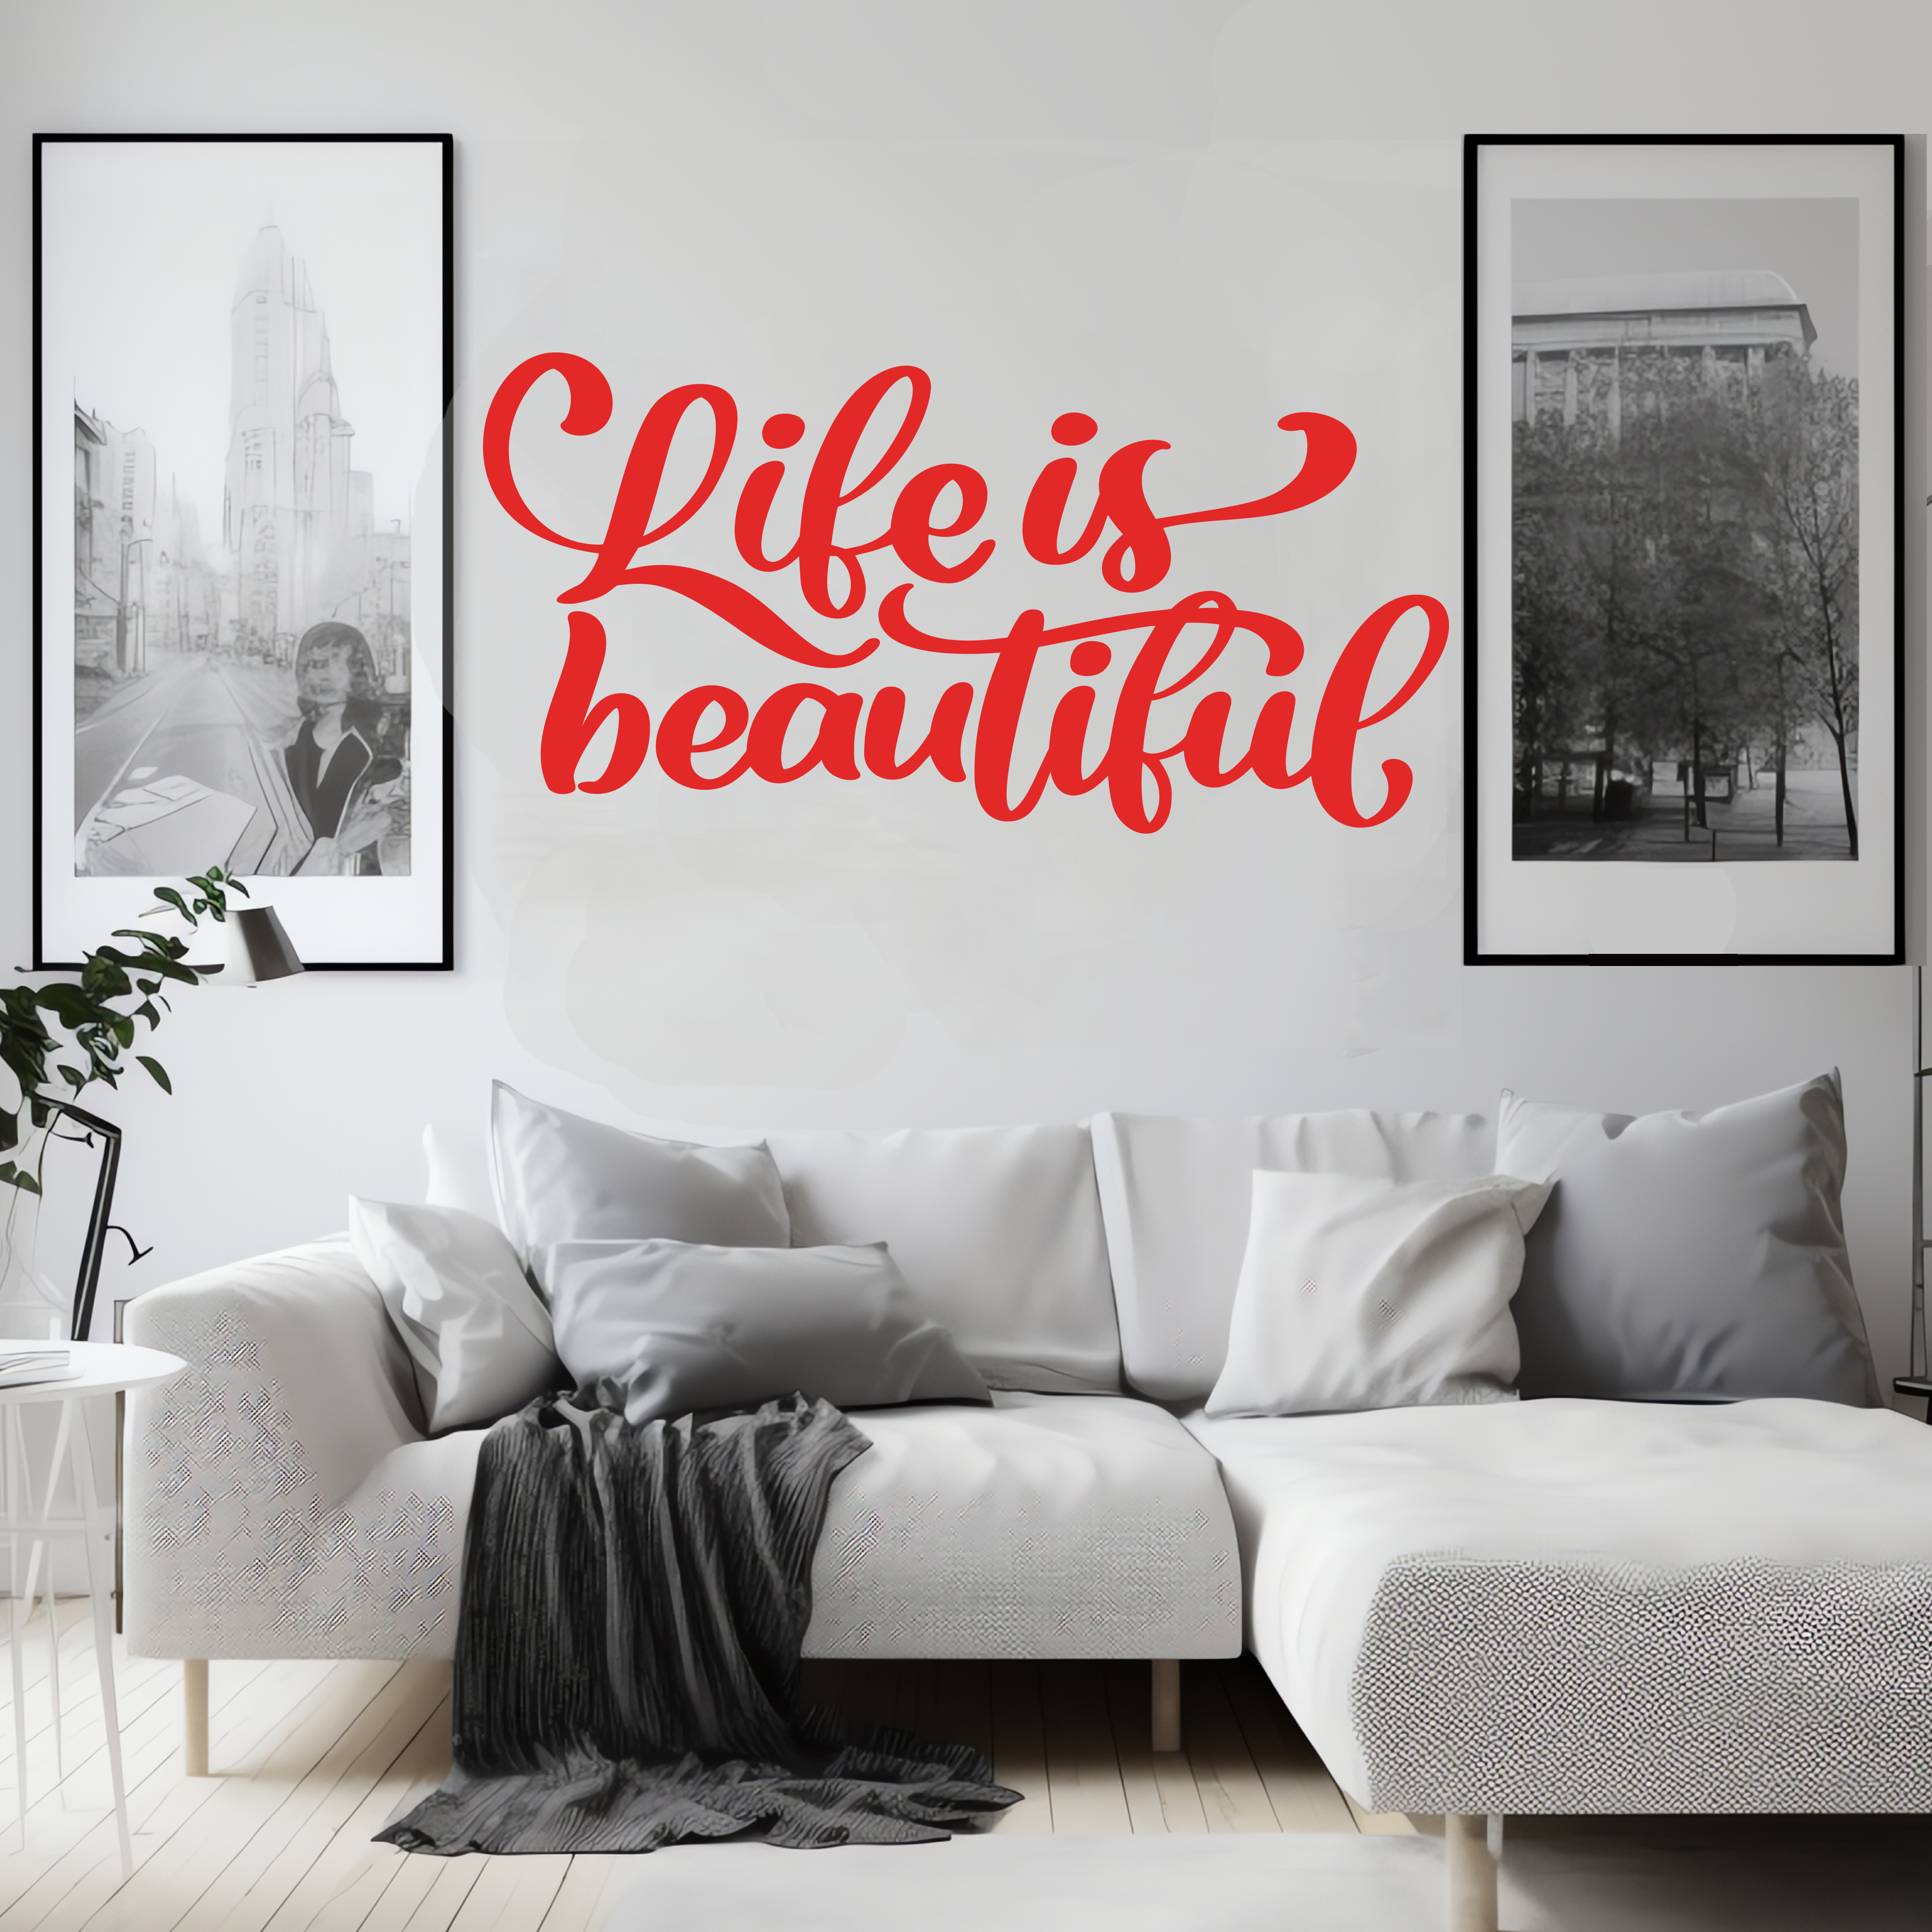 Life is Beautiful Wall Sticker Decal